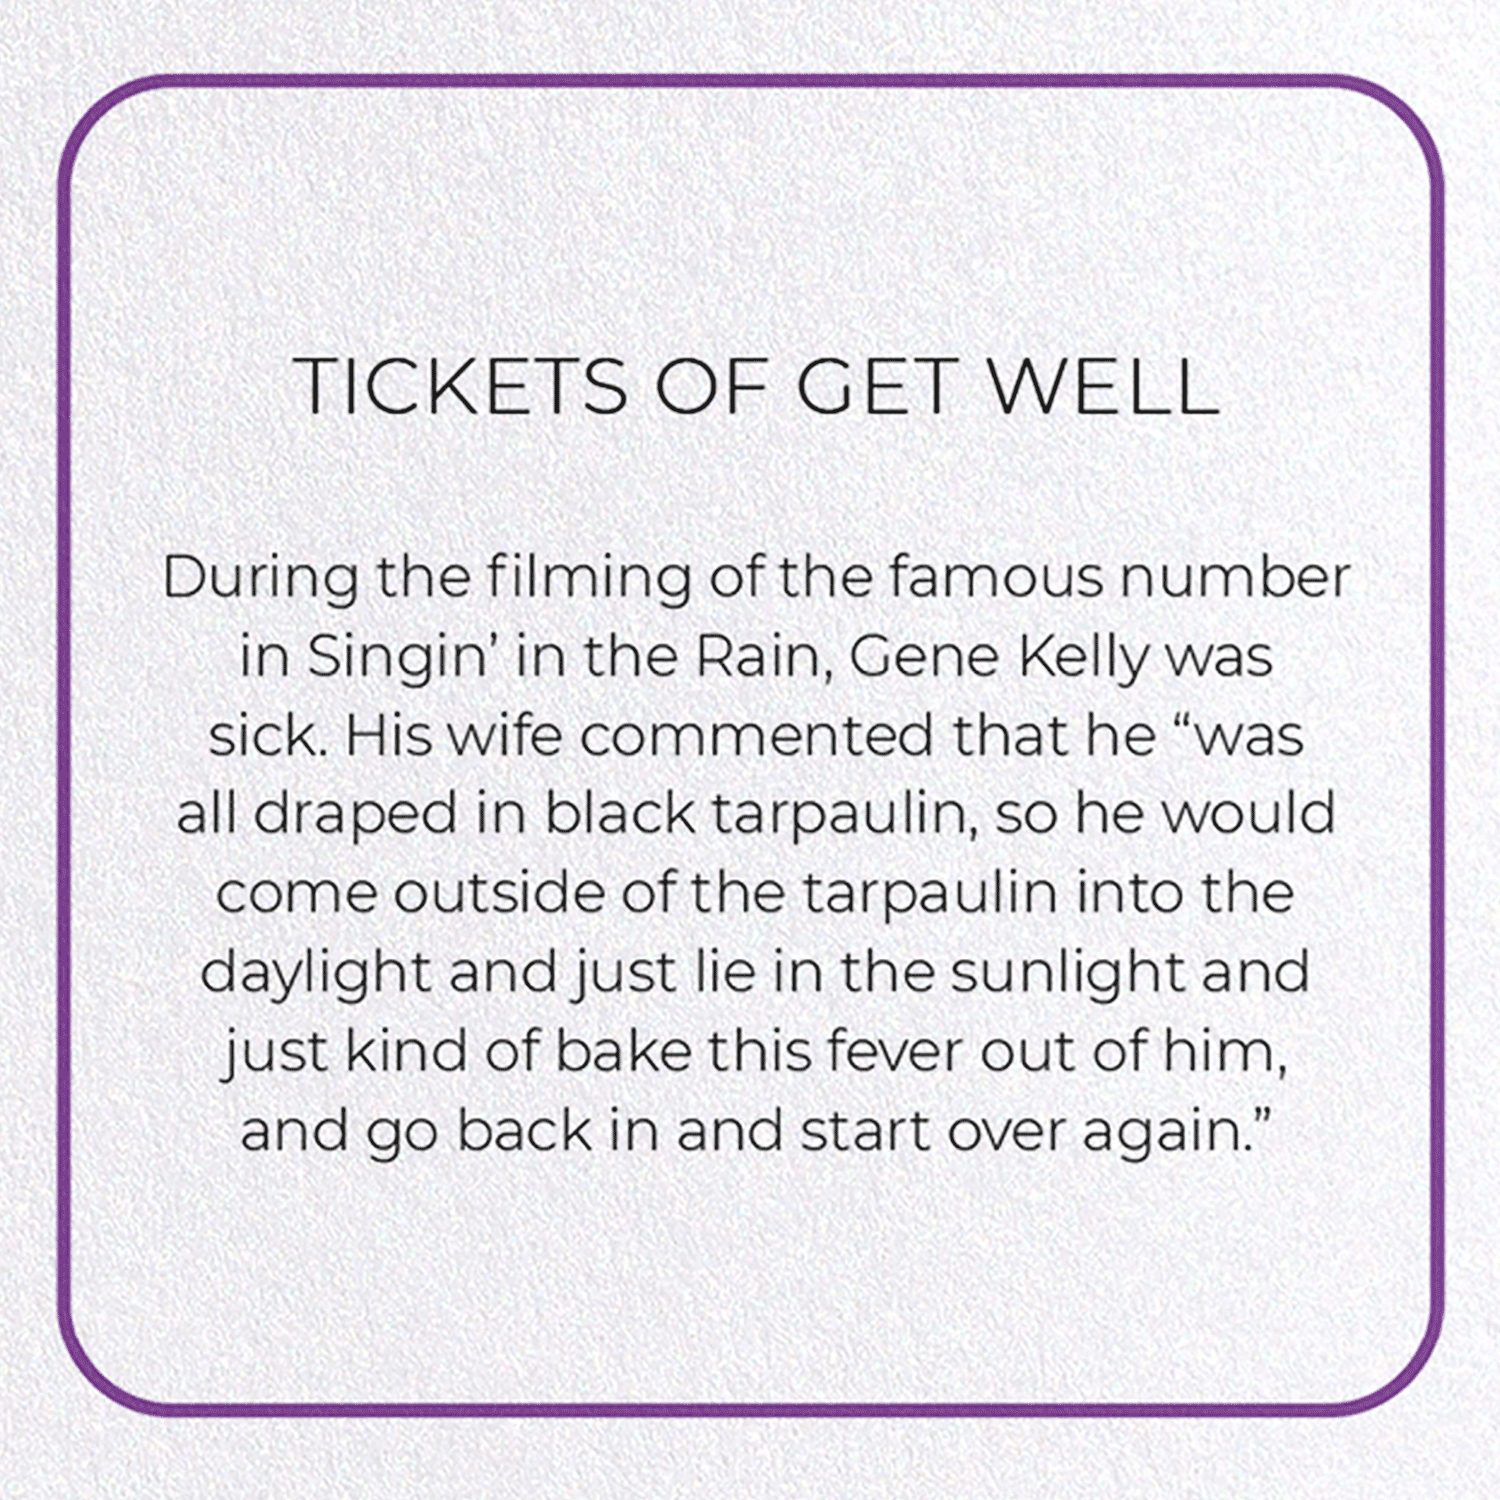 TICKETS OF GET WELL: Photo Greeting Card